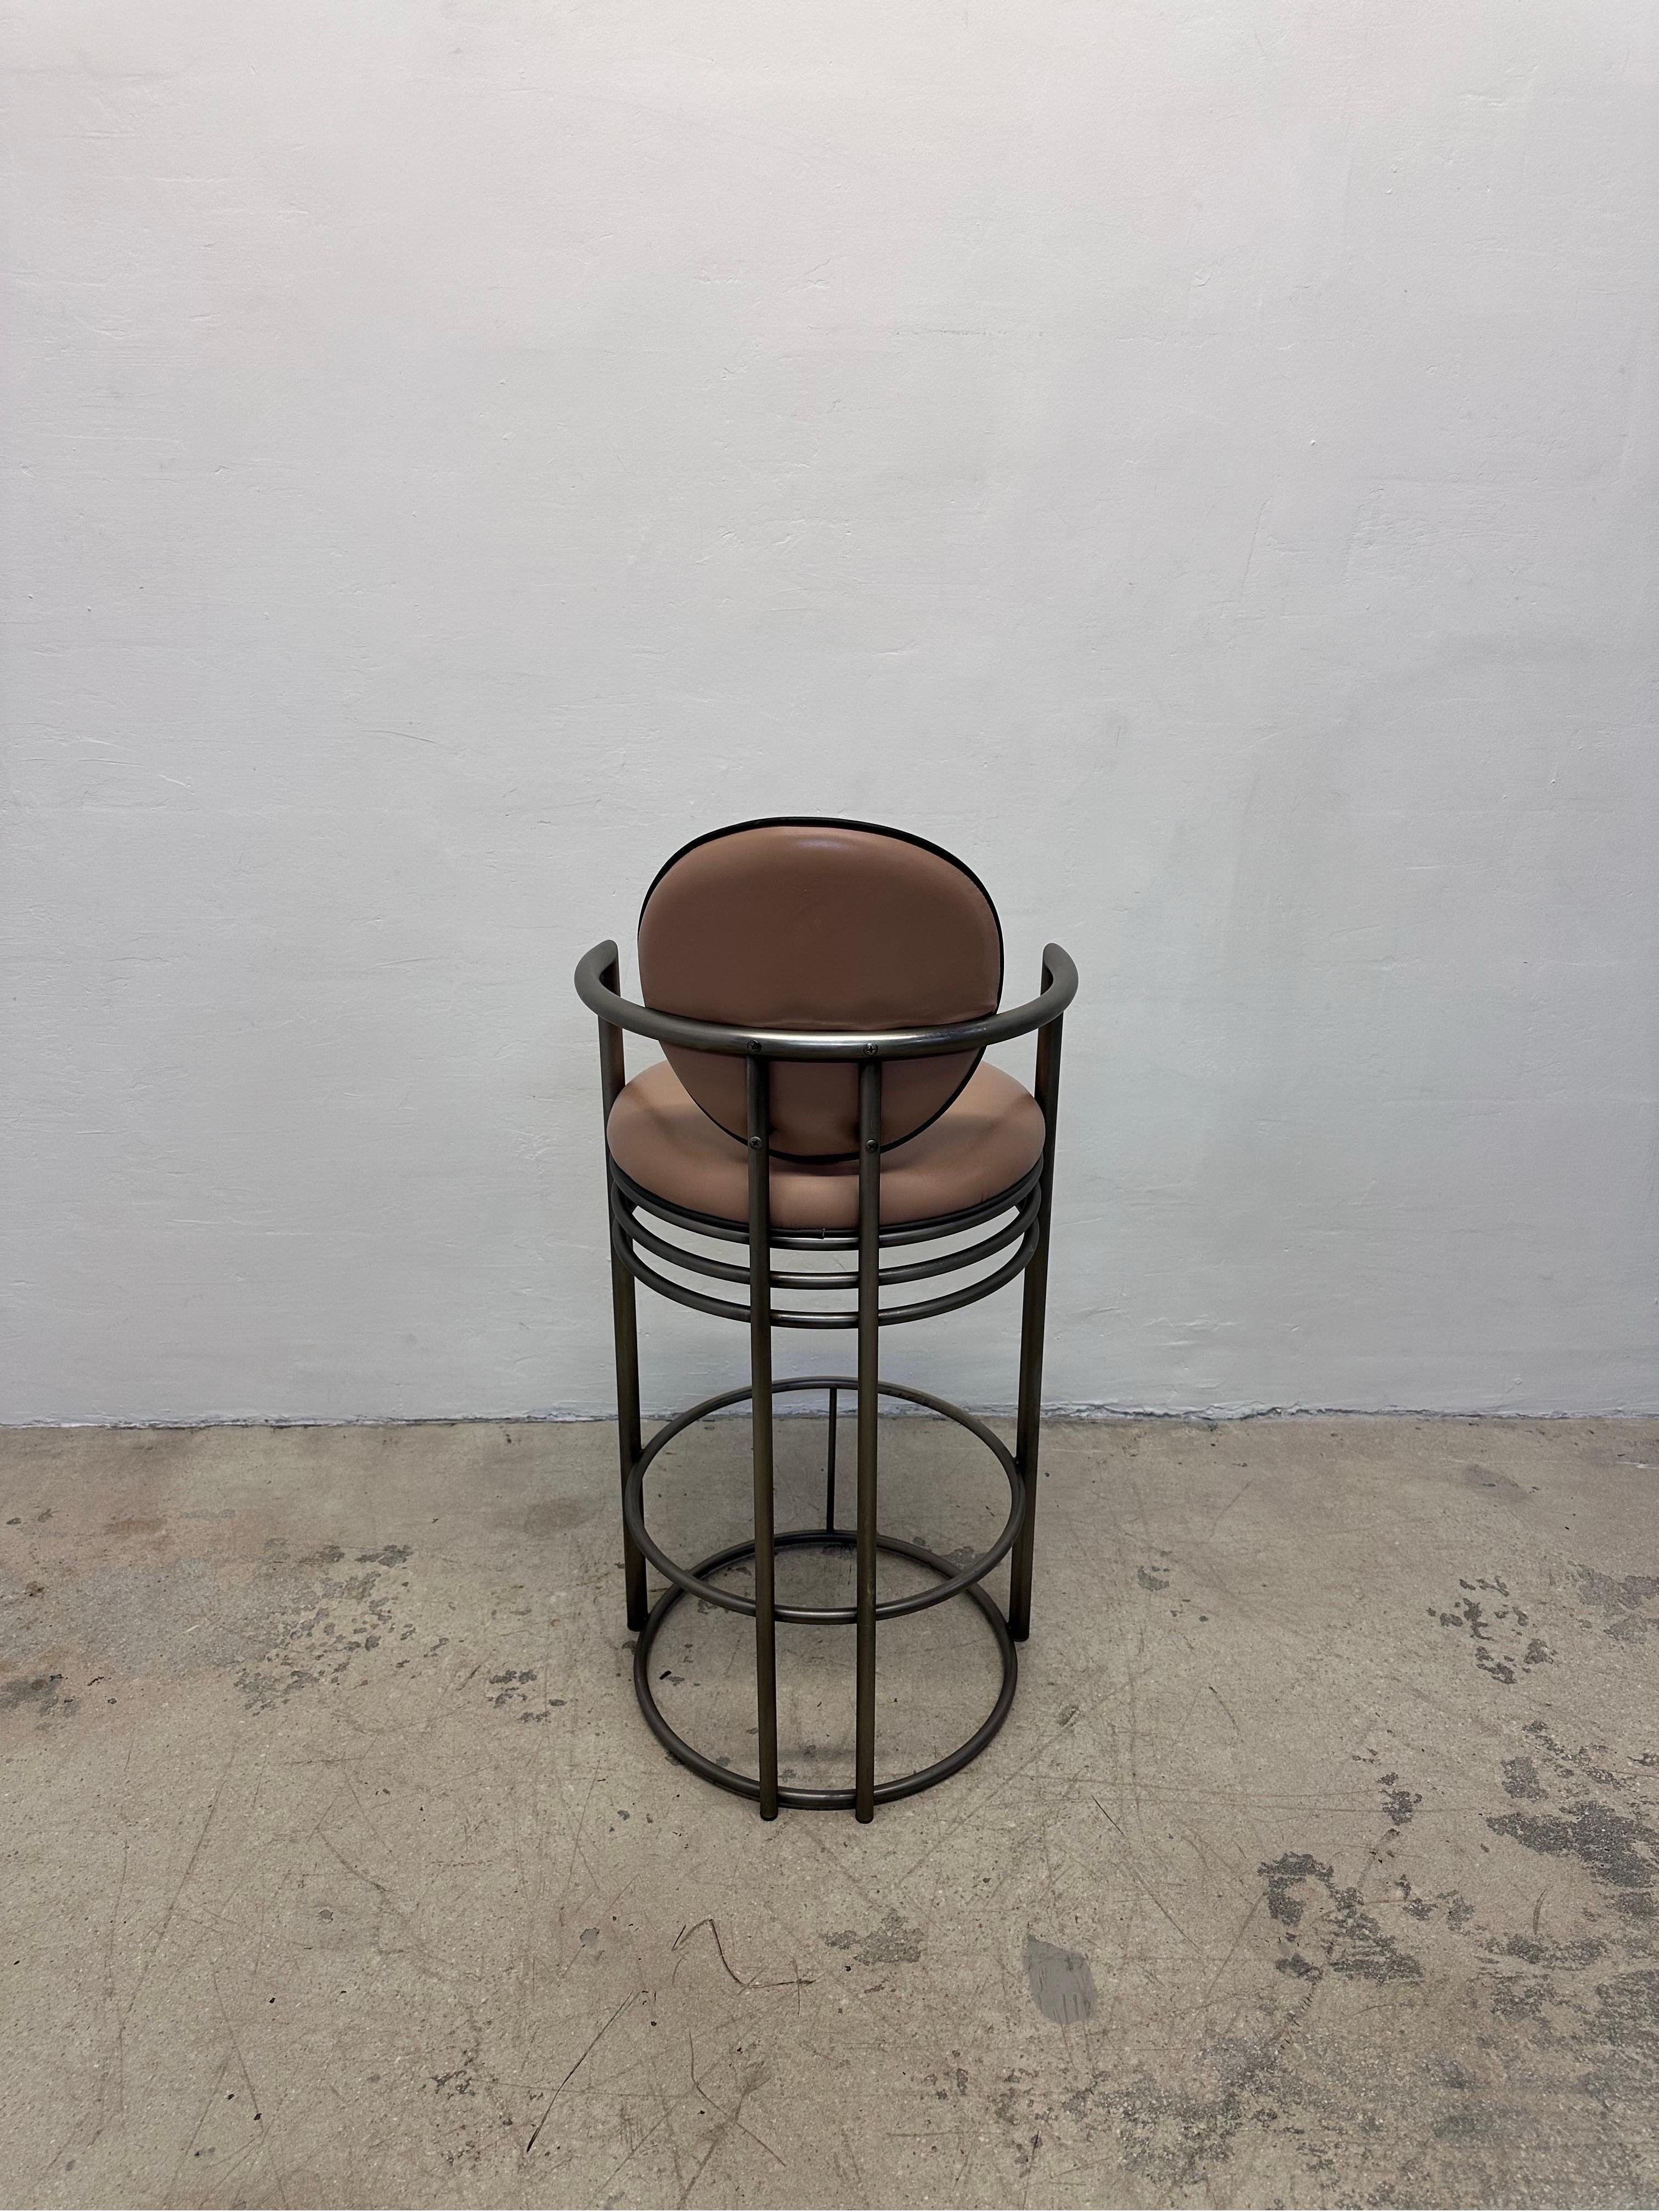 20th Century Design Institute America Deco Revival Bar Stools With Arms, 1980s - Set of Three For Sale